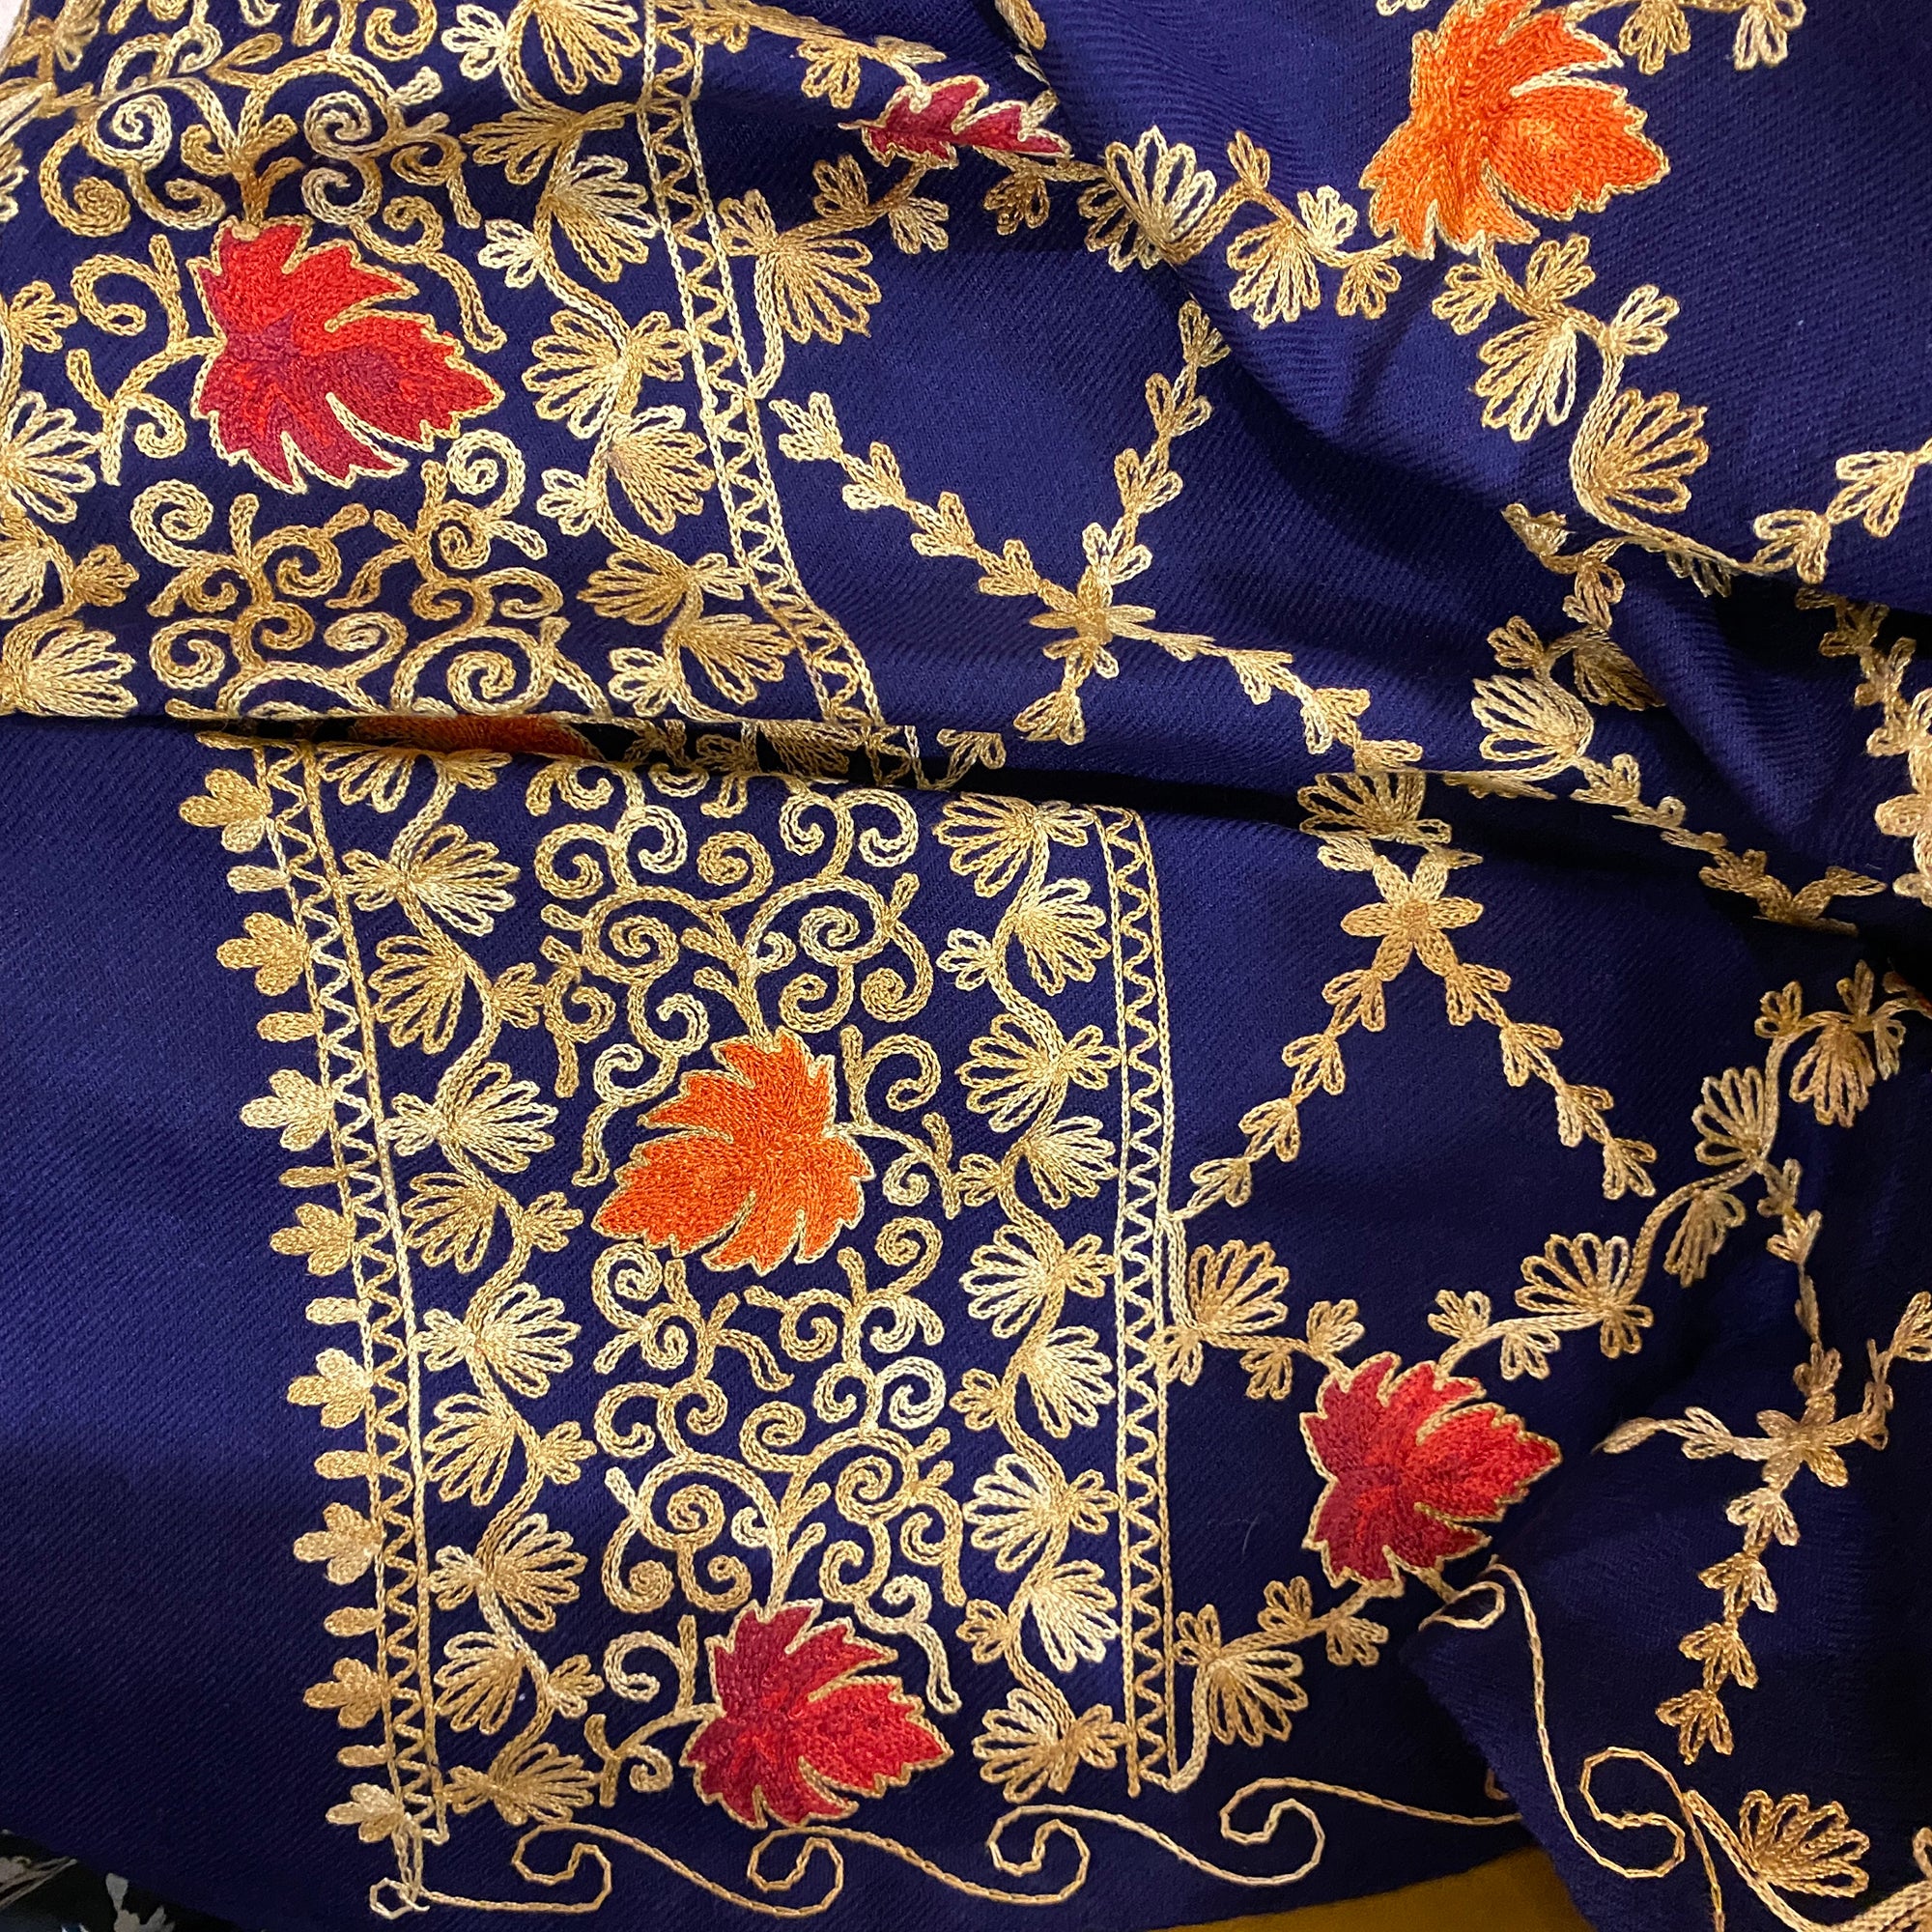 Navy Embroidered Shawls - 2 Styles - Vintage India NYC